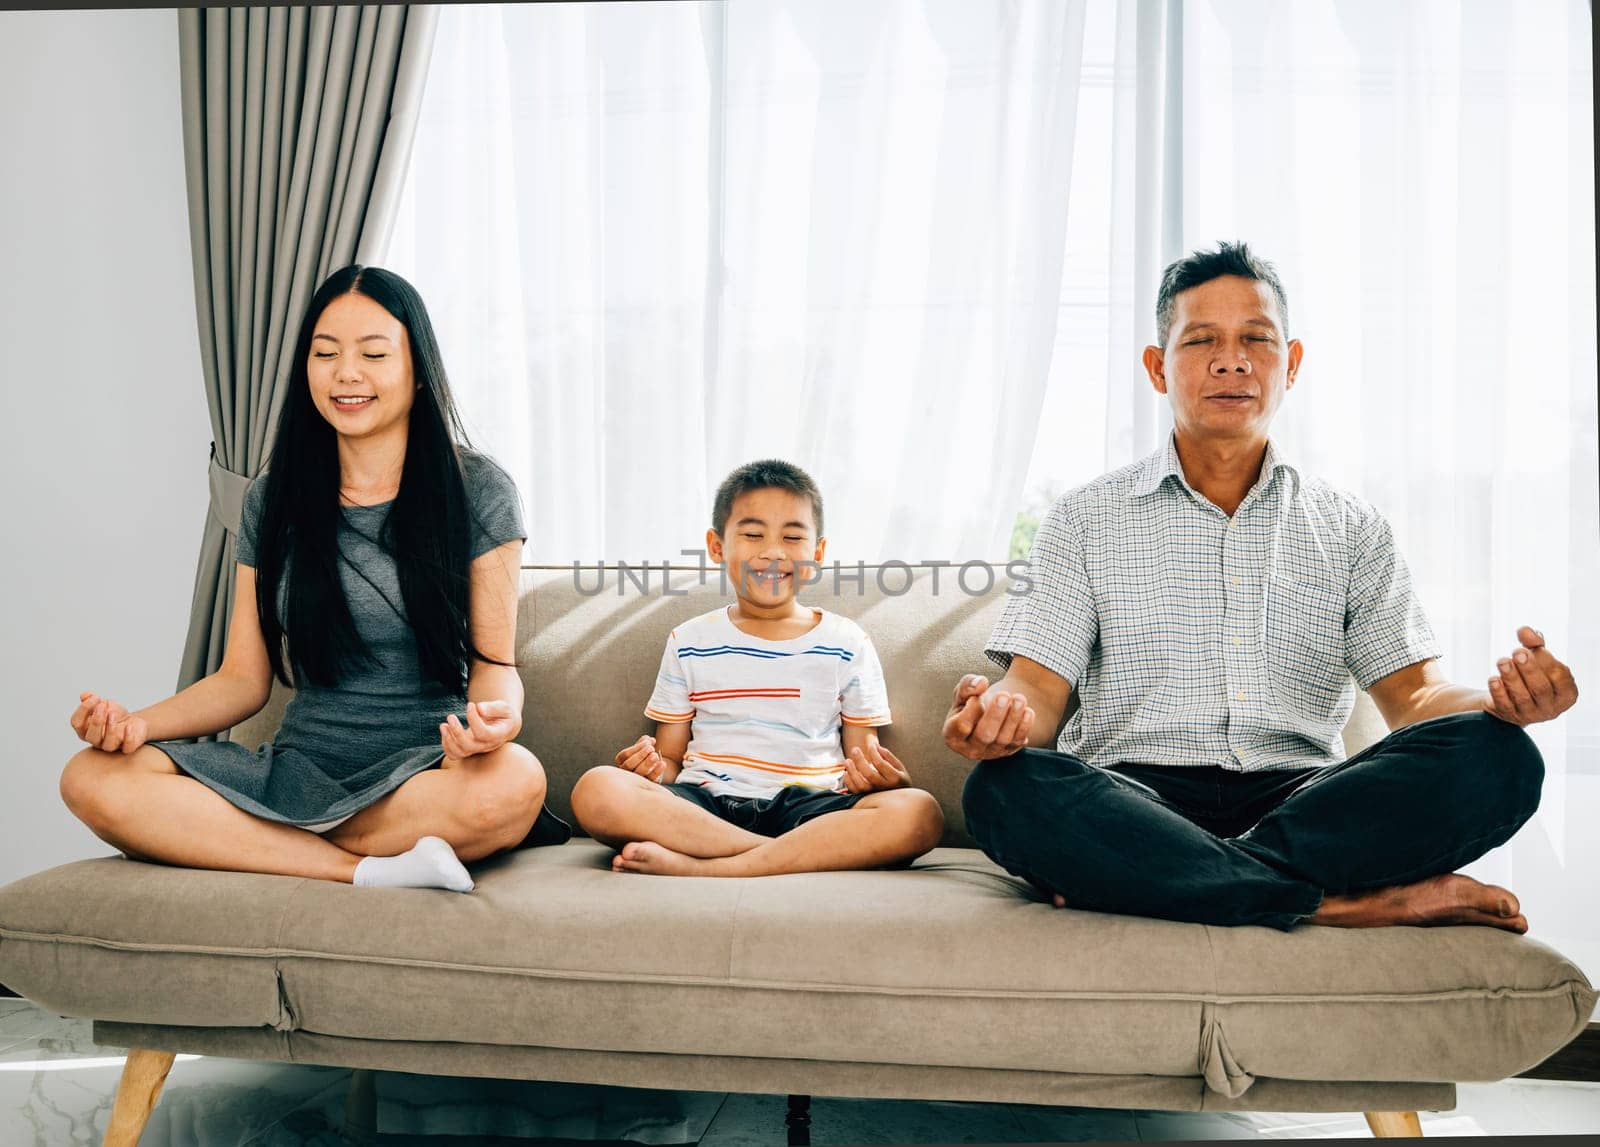 Serene family bonding, parents and their little son practice yoga seated in lotus pose on a sofa. Encouraging harmony balance and tranquility within the home.